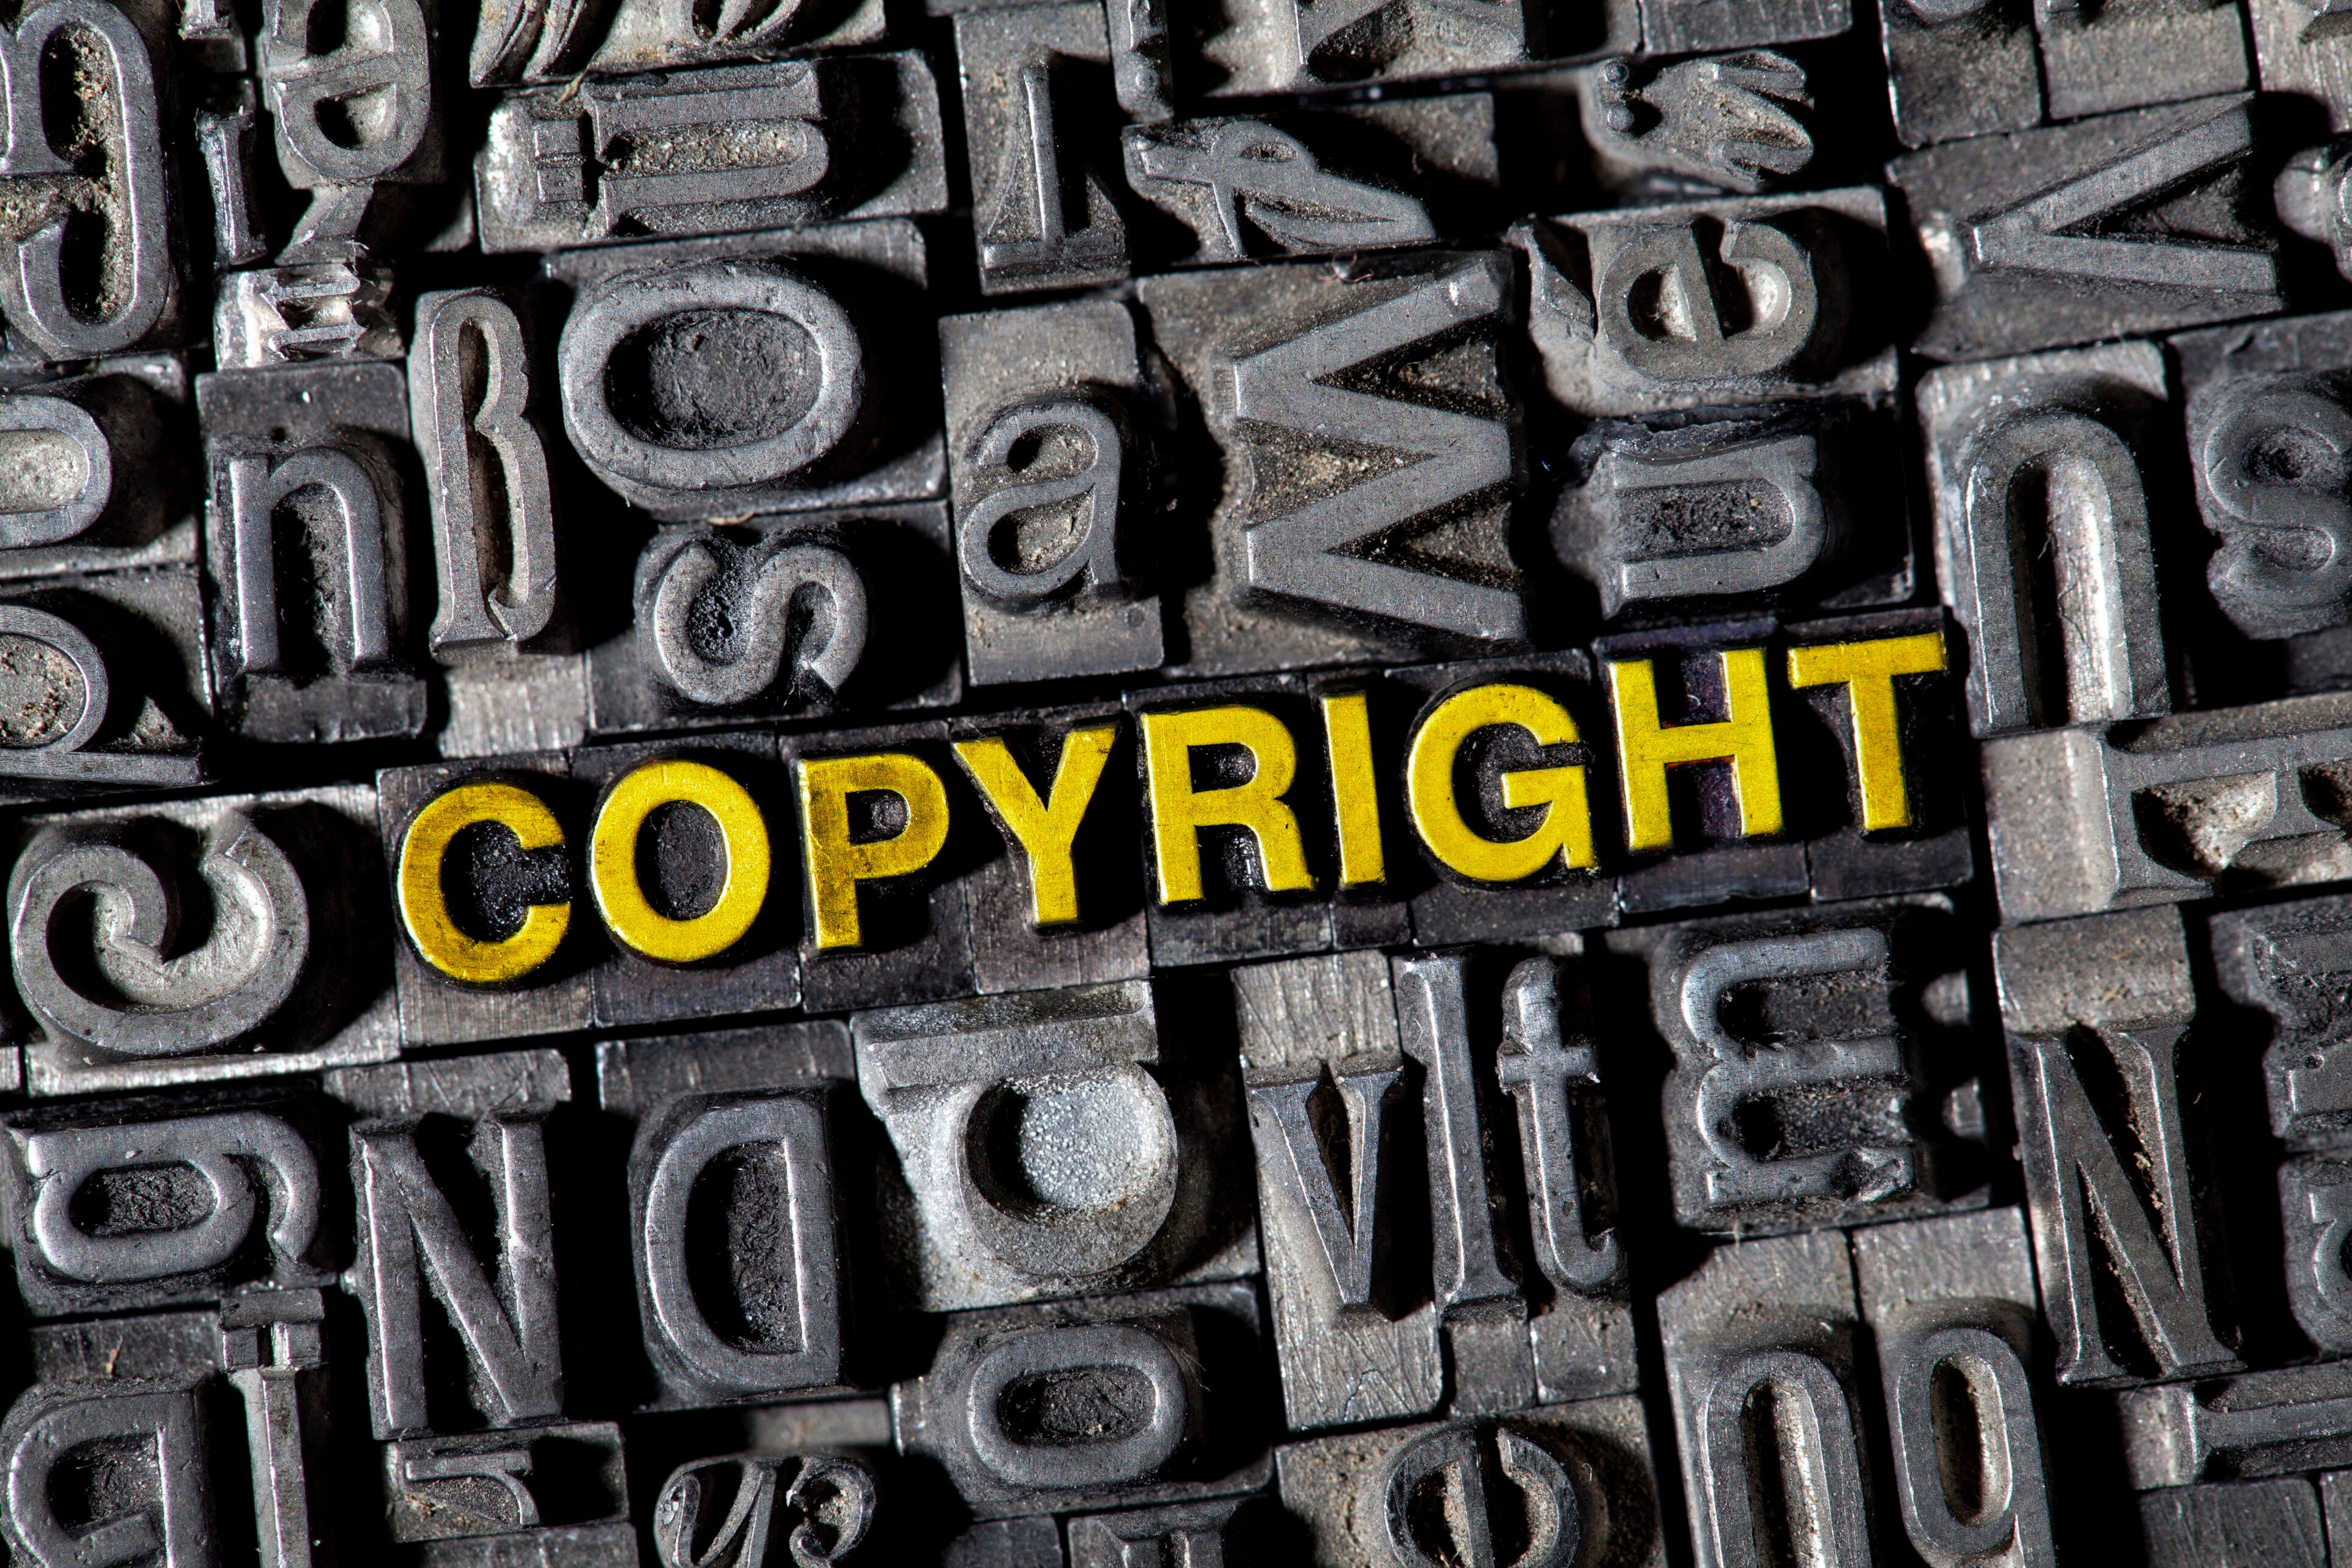 European copyright directive will impose link tax to subsidize publishers